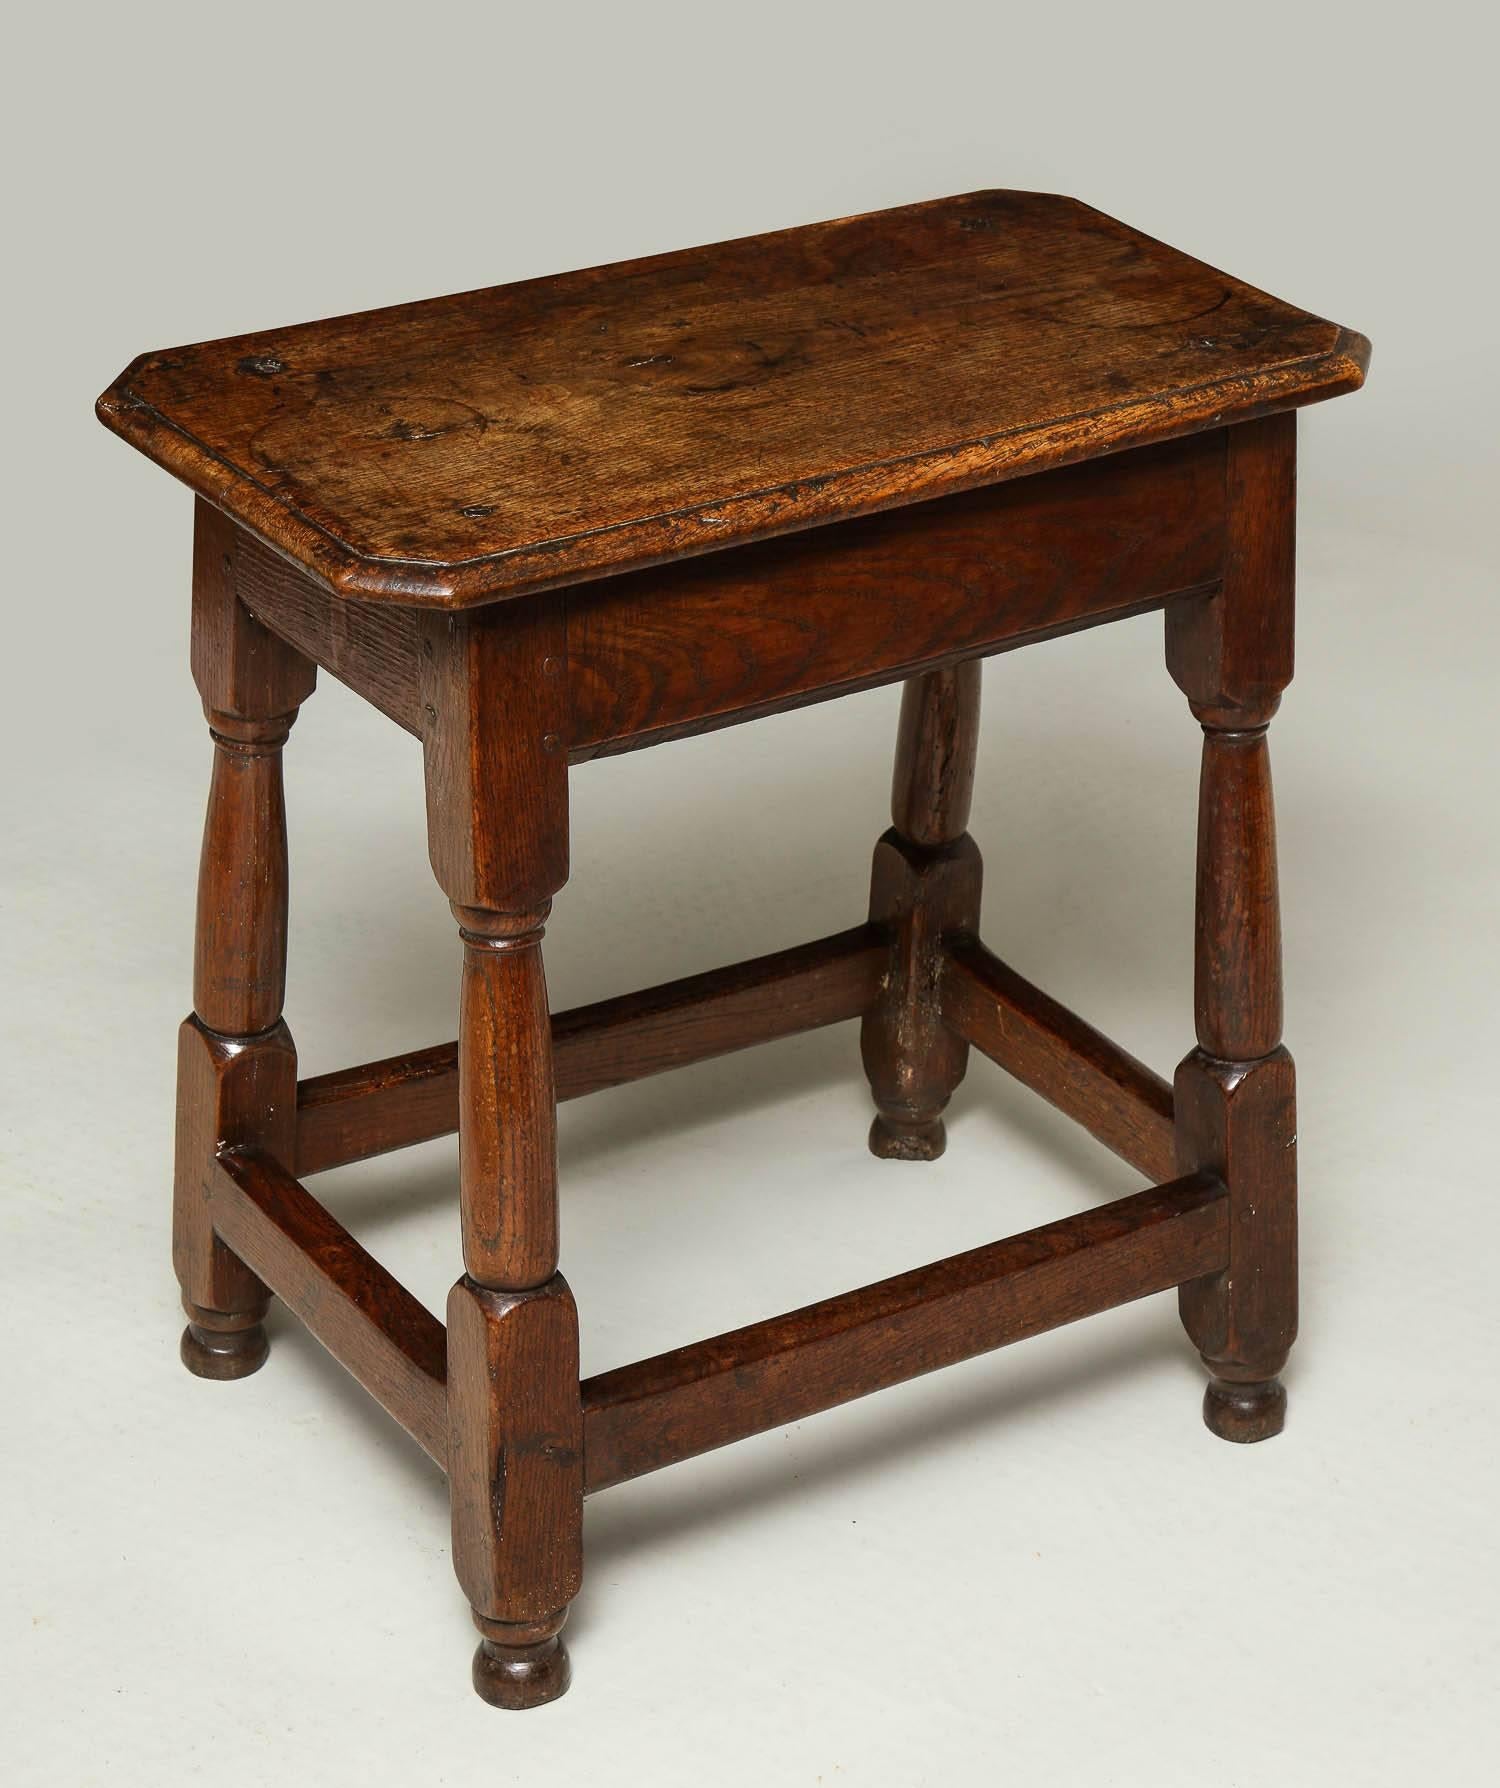 Very good late 17th century English oak joined table, the thumb molded top with canted corners, over molded apron and standing on splayed balustrade turned legs joined by box stretcher and standing on original turned button feet, possessing great